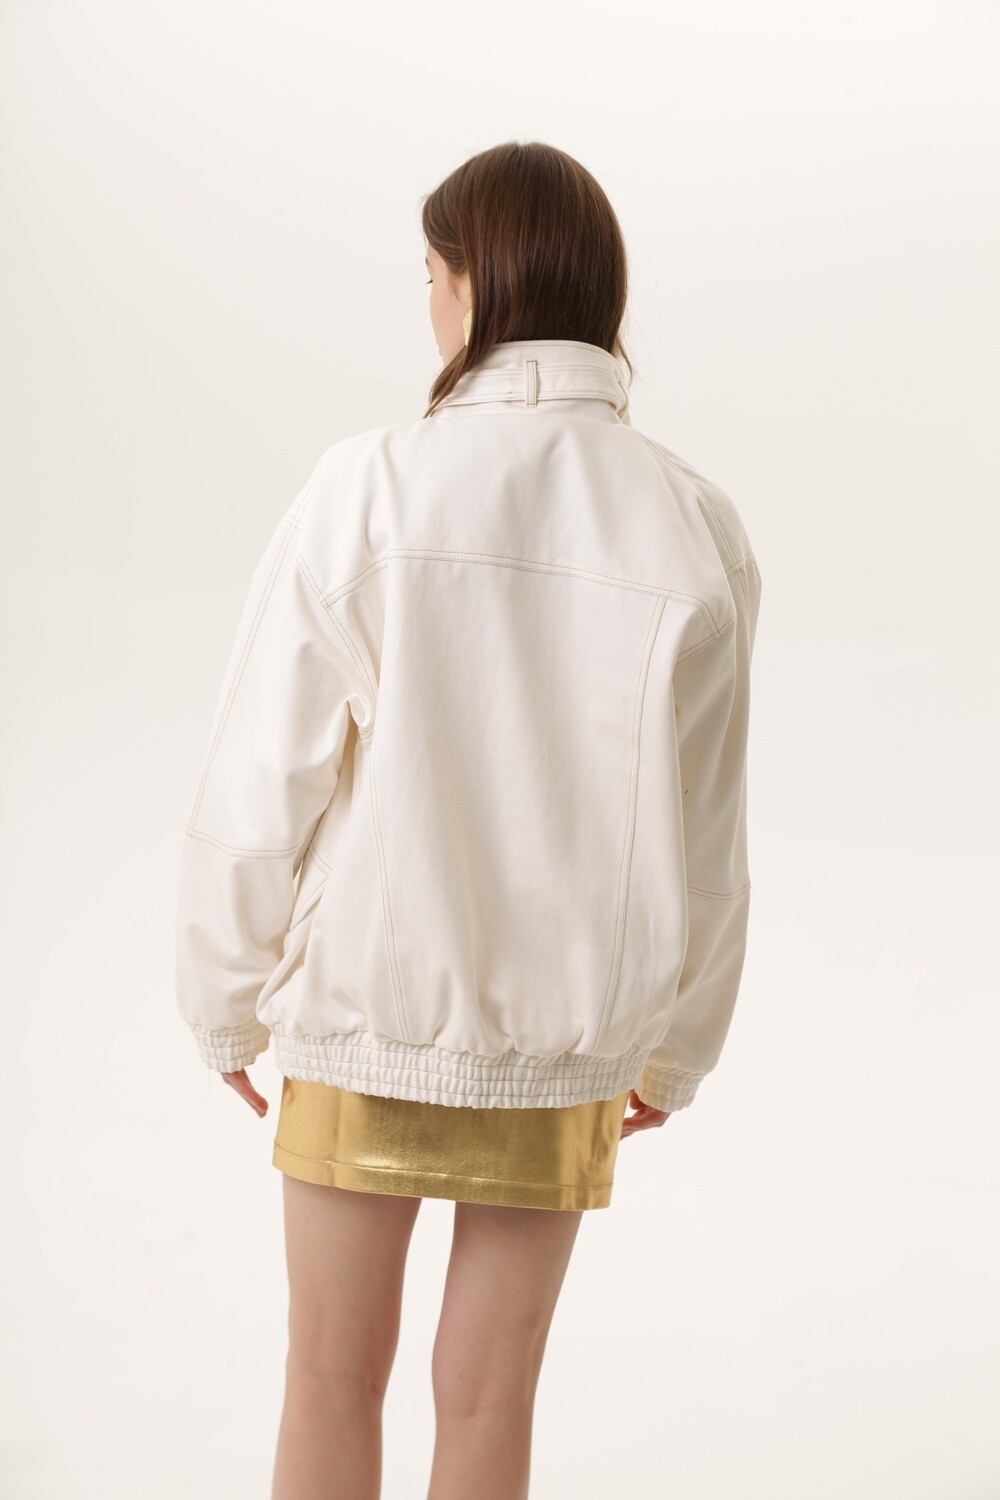 Jeans jacket in milky color